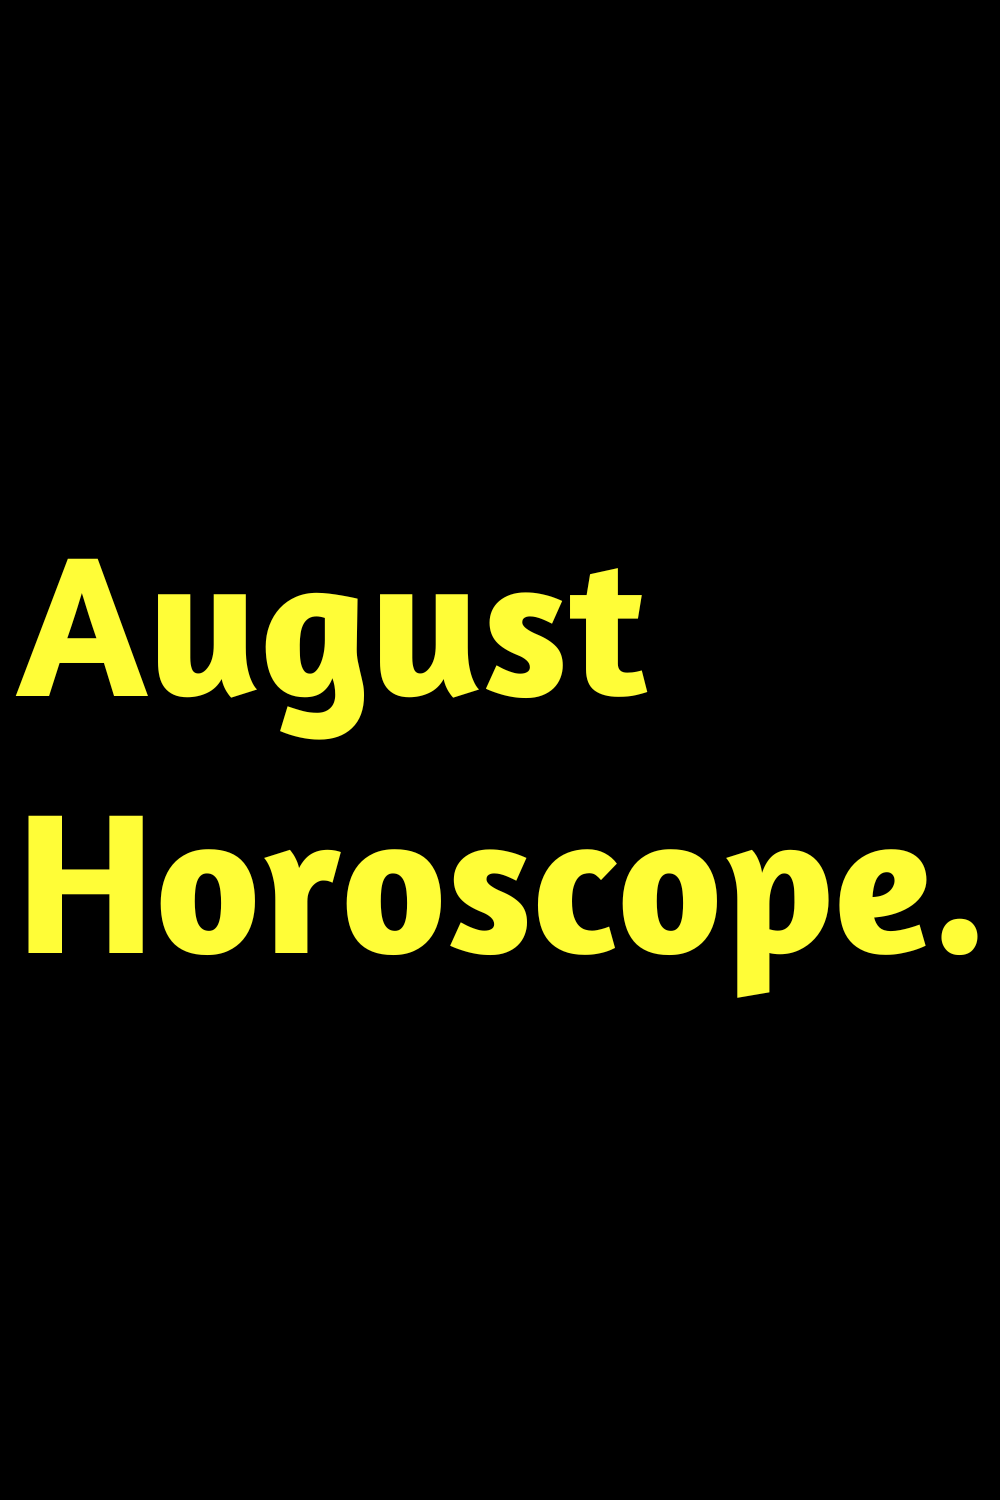 August Horoscope. Cupid Will Be Very Active In The Life Of Sagittarius